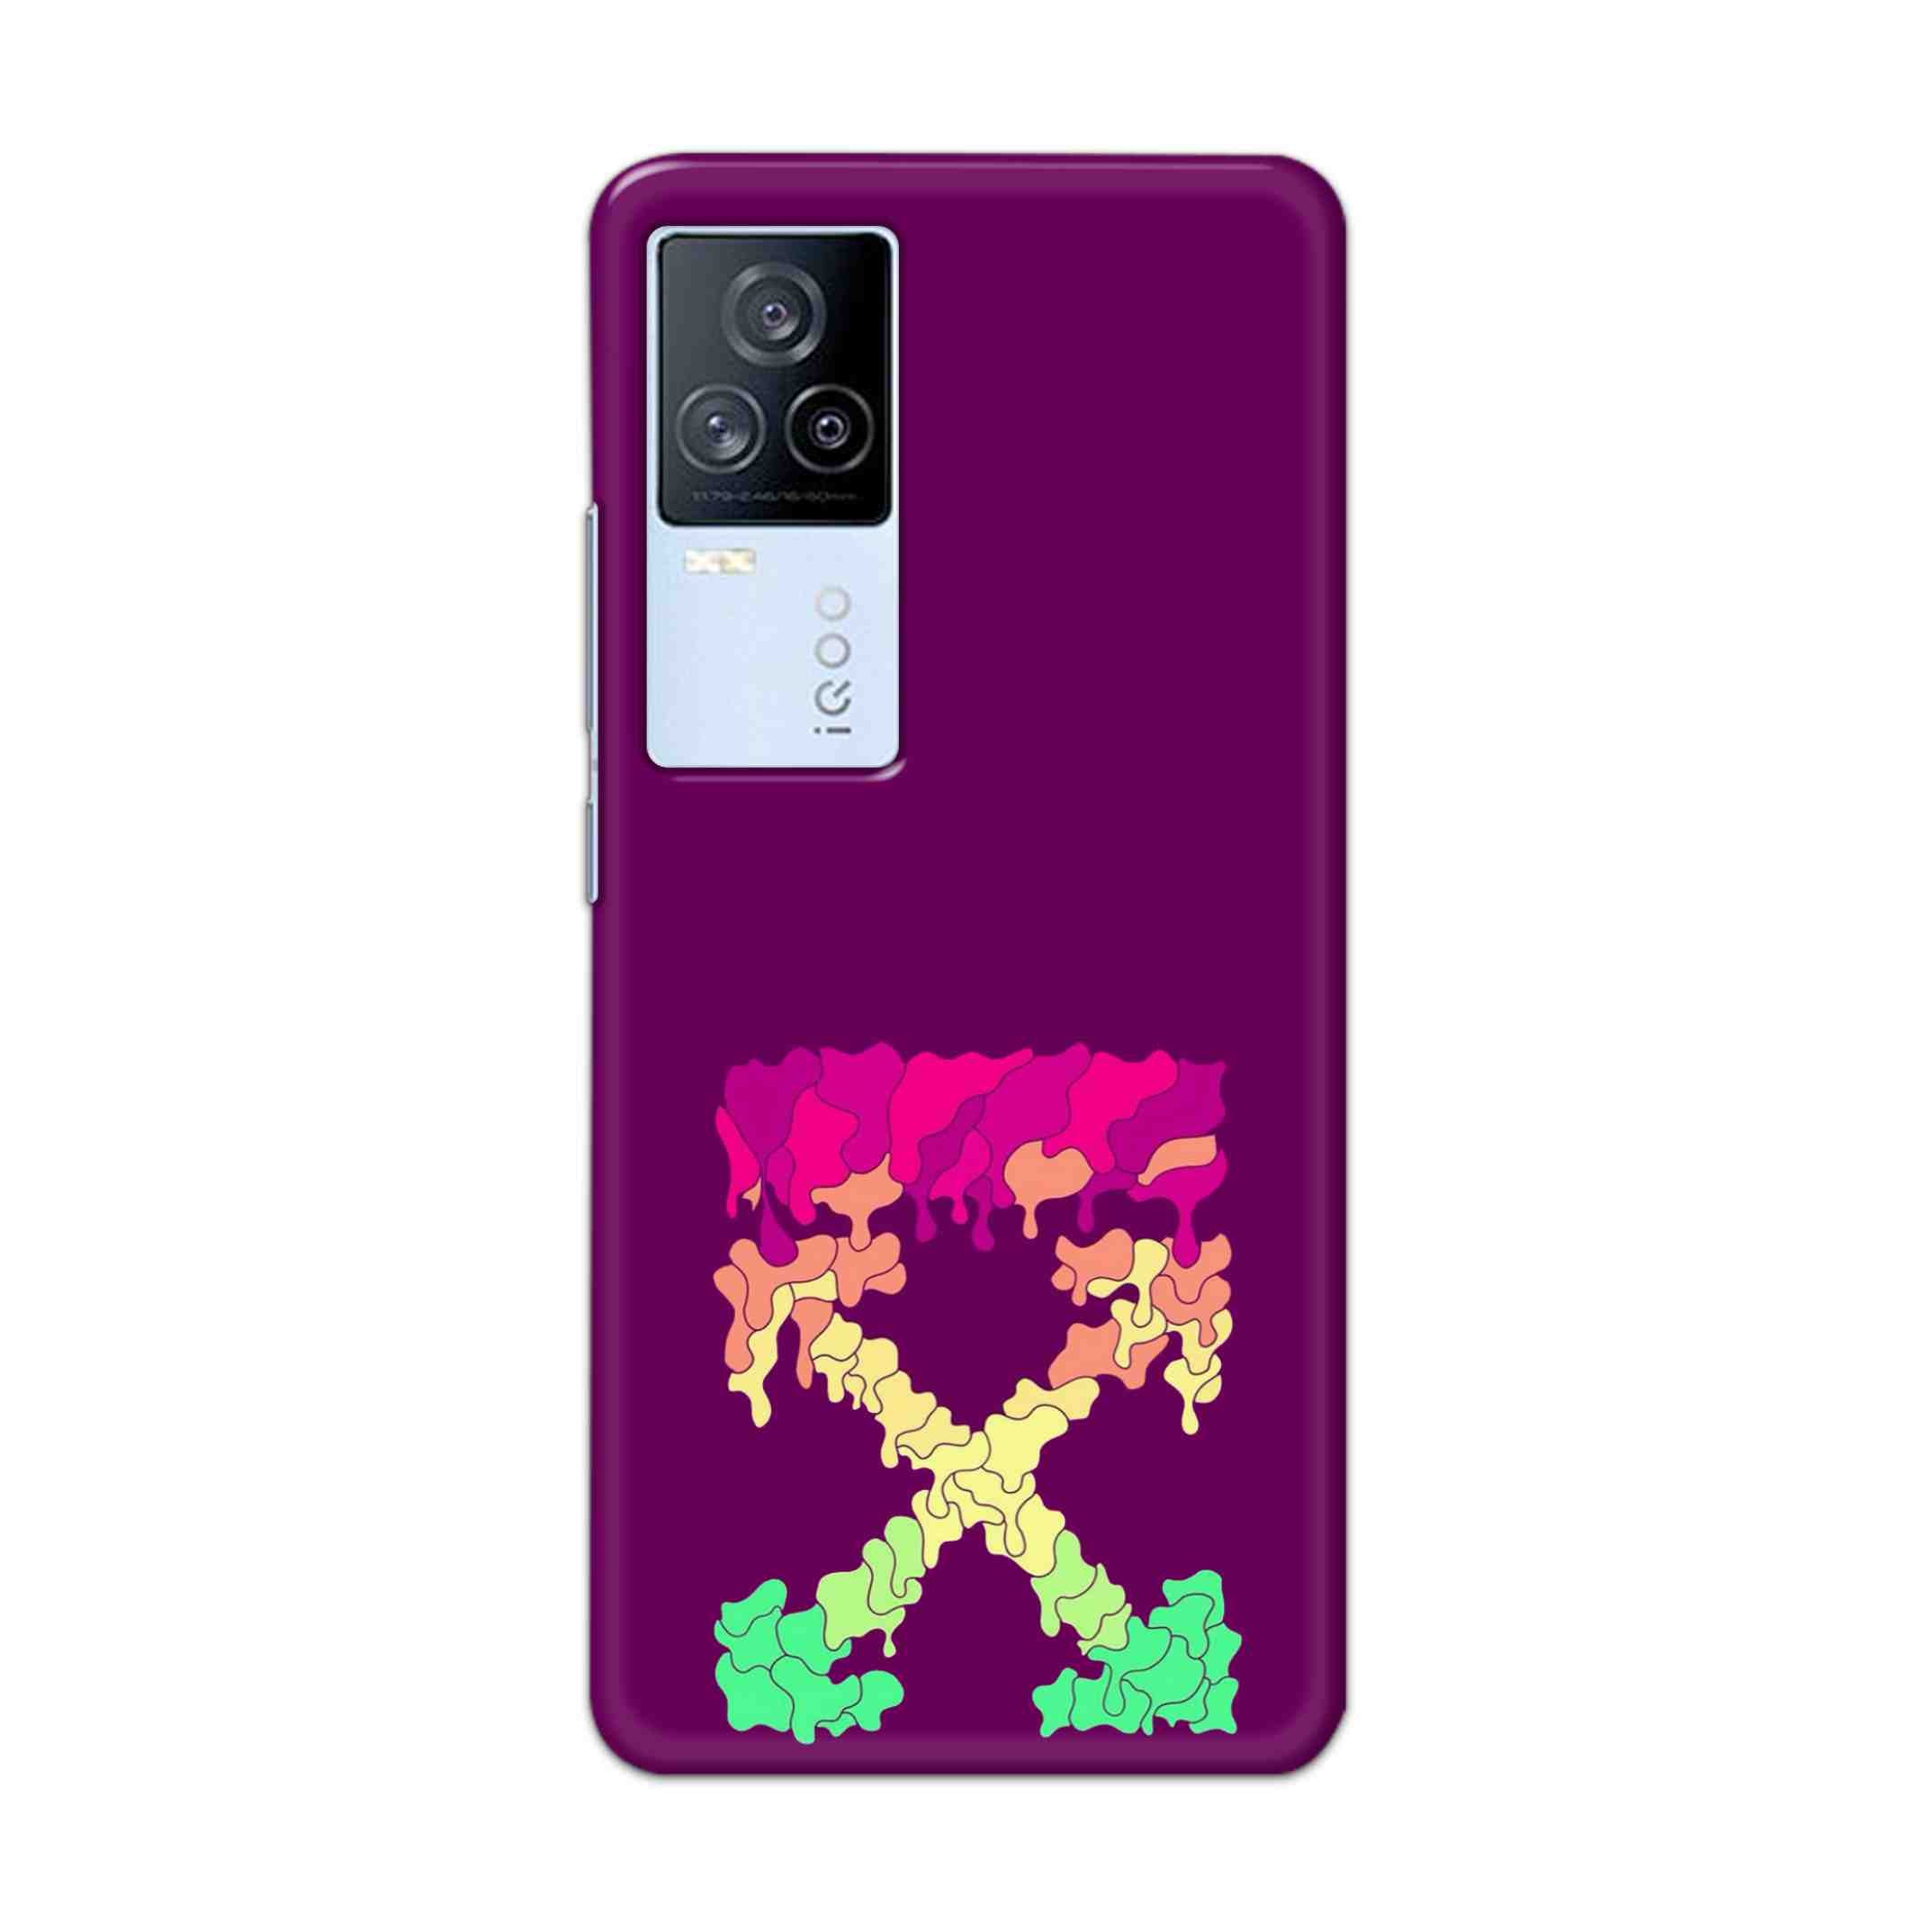 Buy X.O Hard Back Mobile Phone Case/Cover For iQOO7 Online